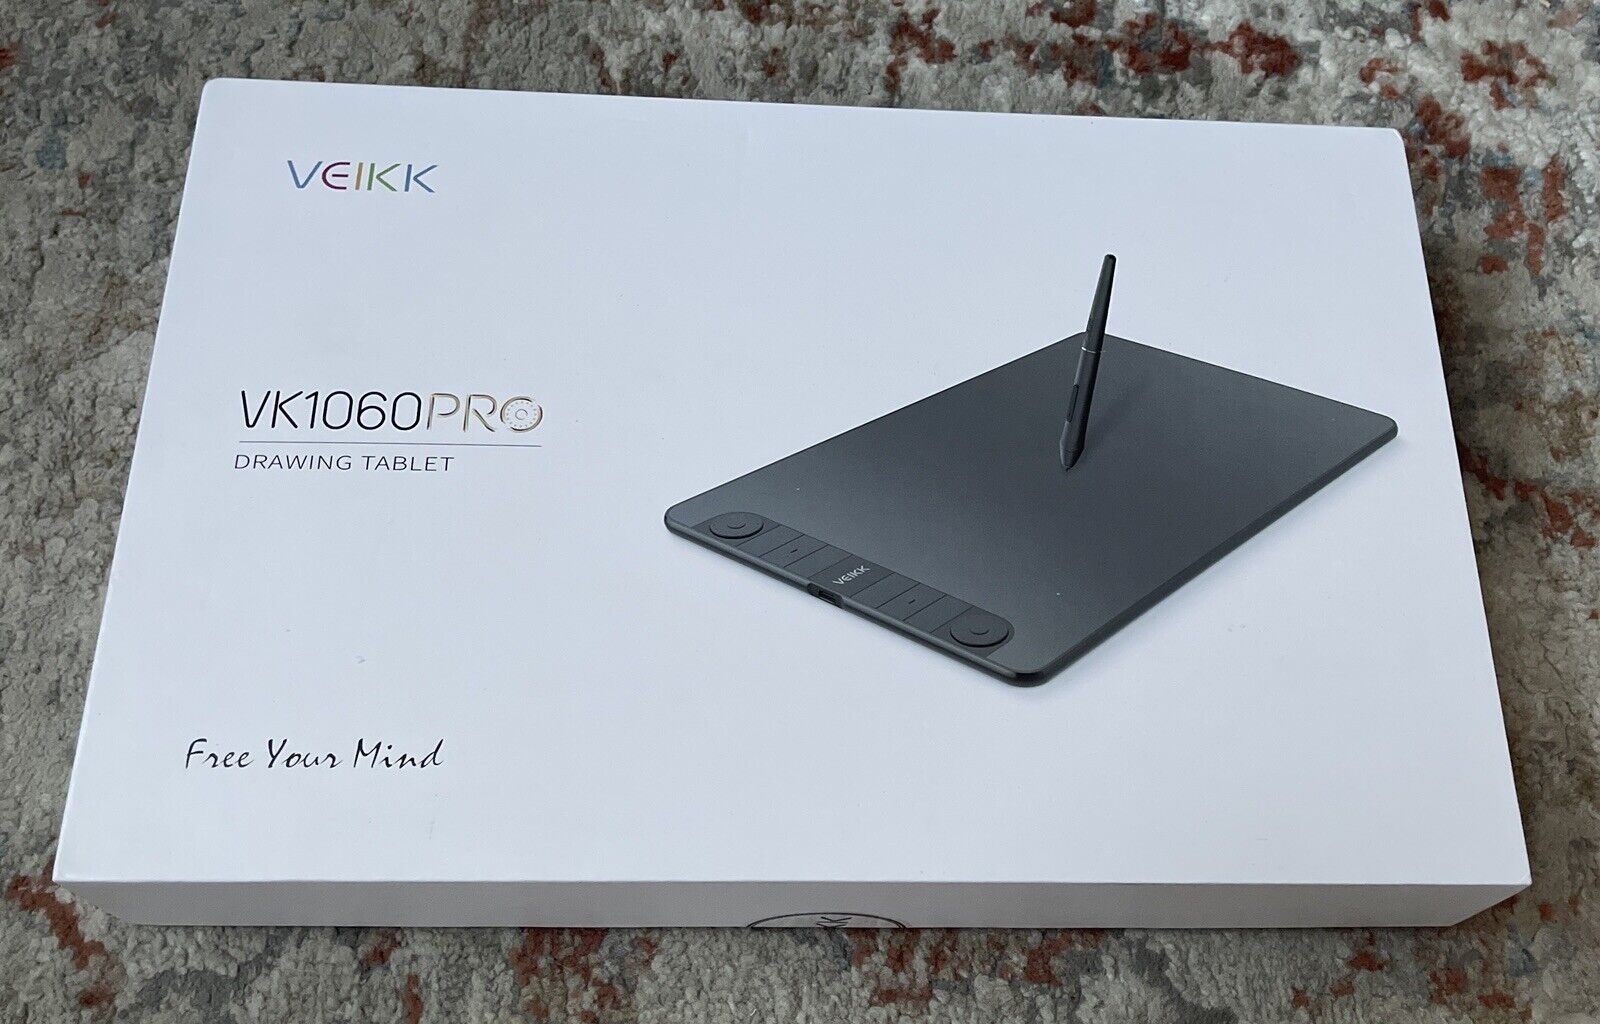 Veikk pro 1060 Drawing Tablet, 10x6” , USB-C, With Accessories